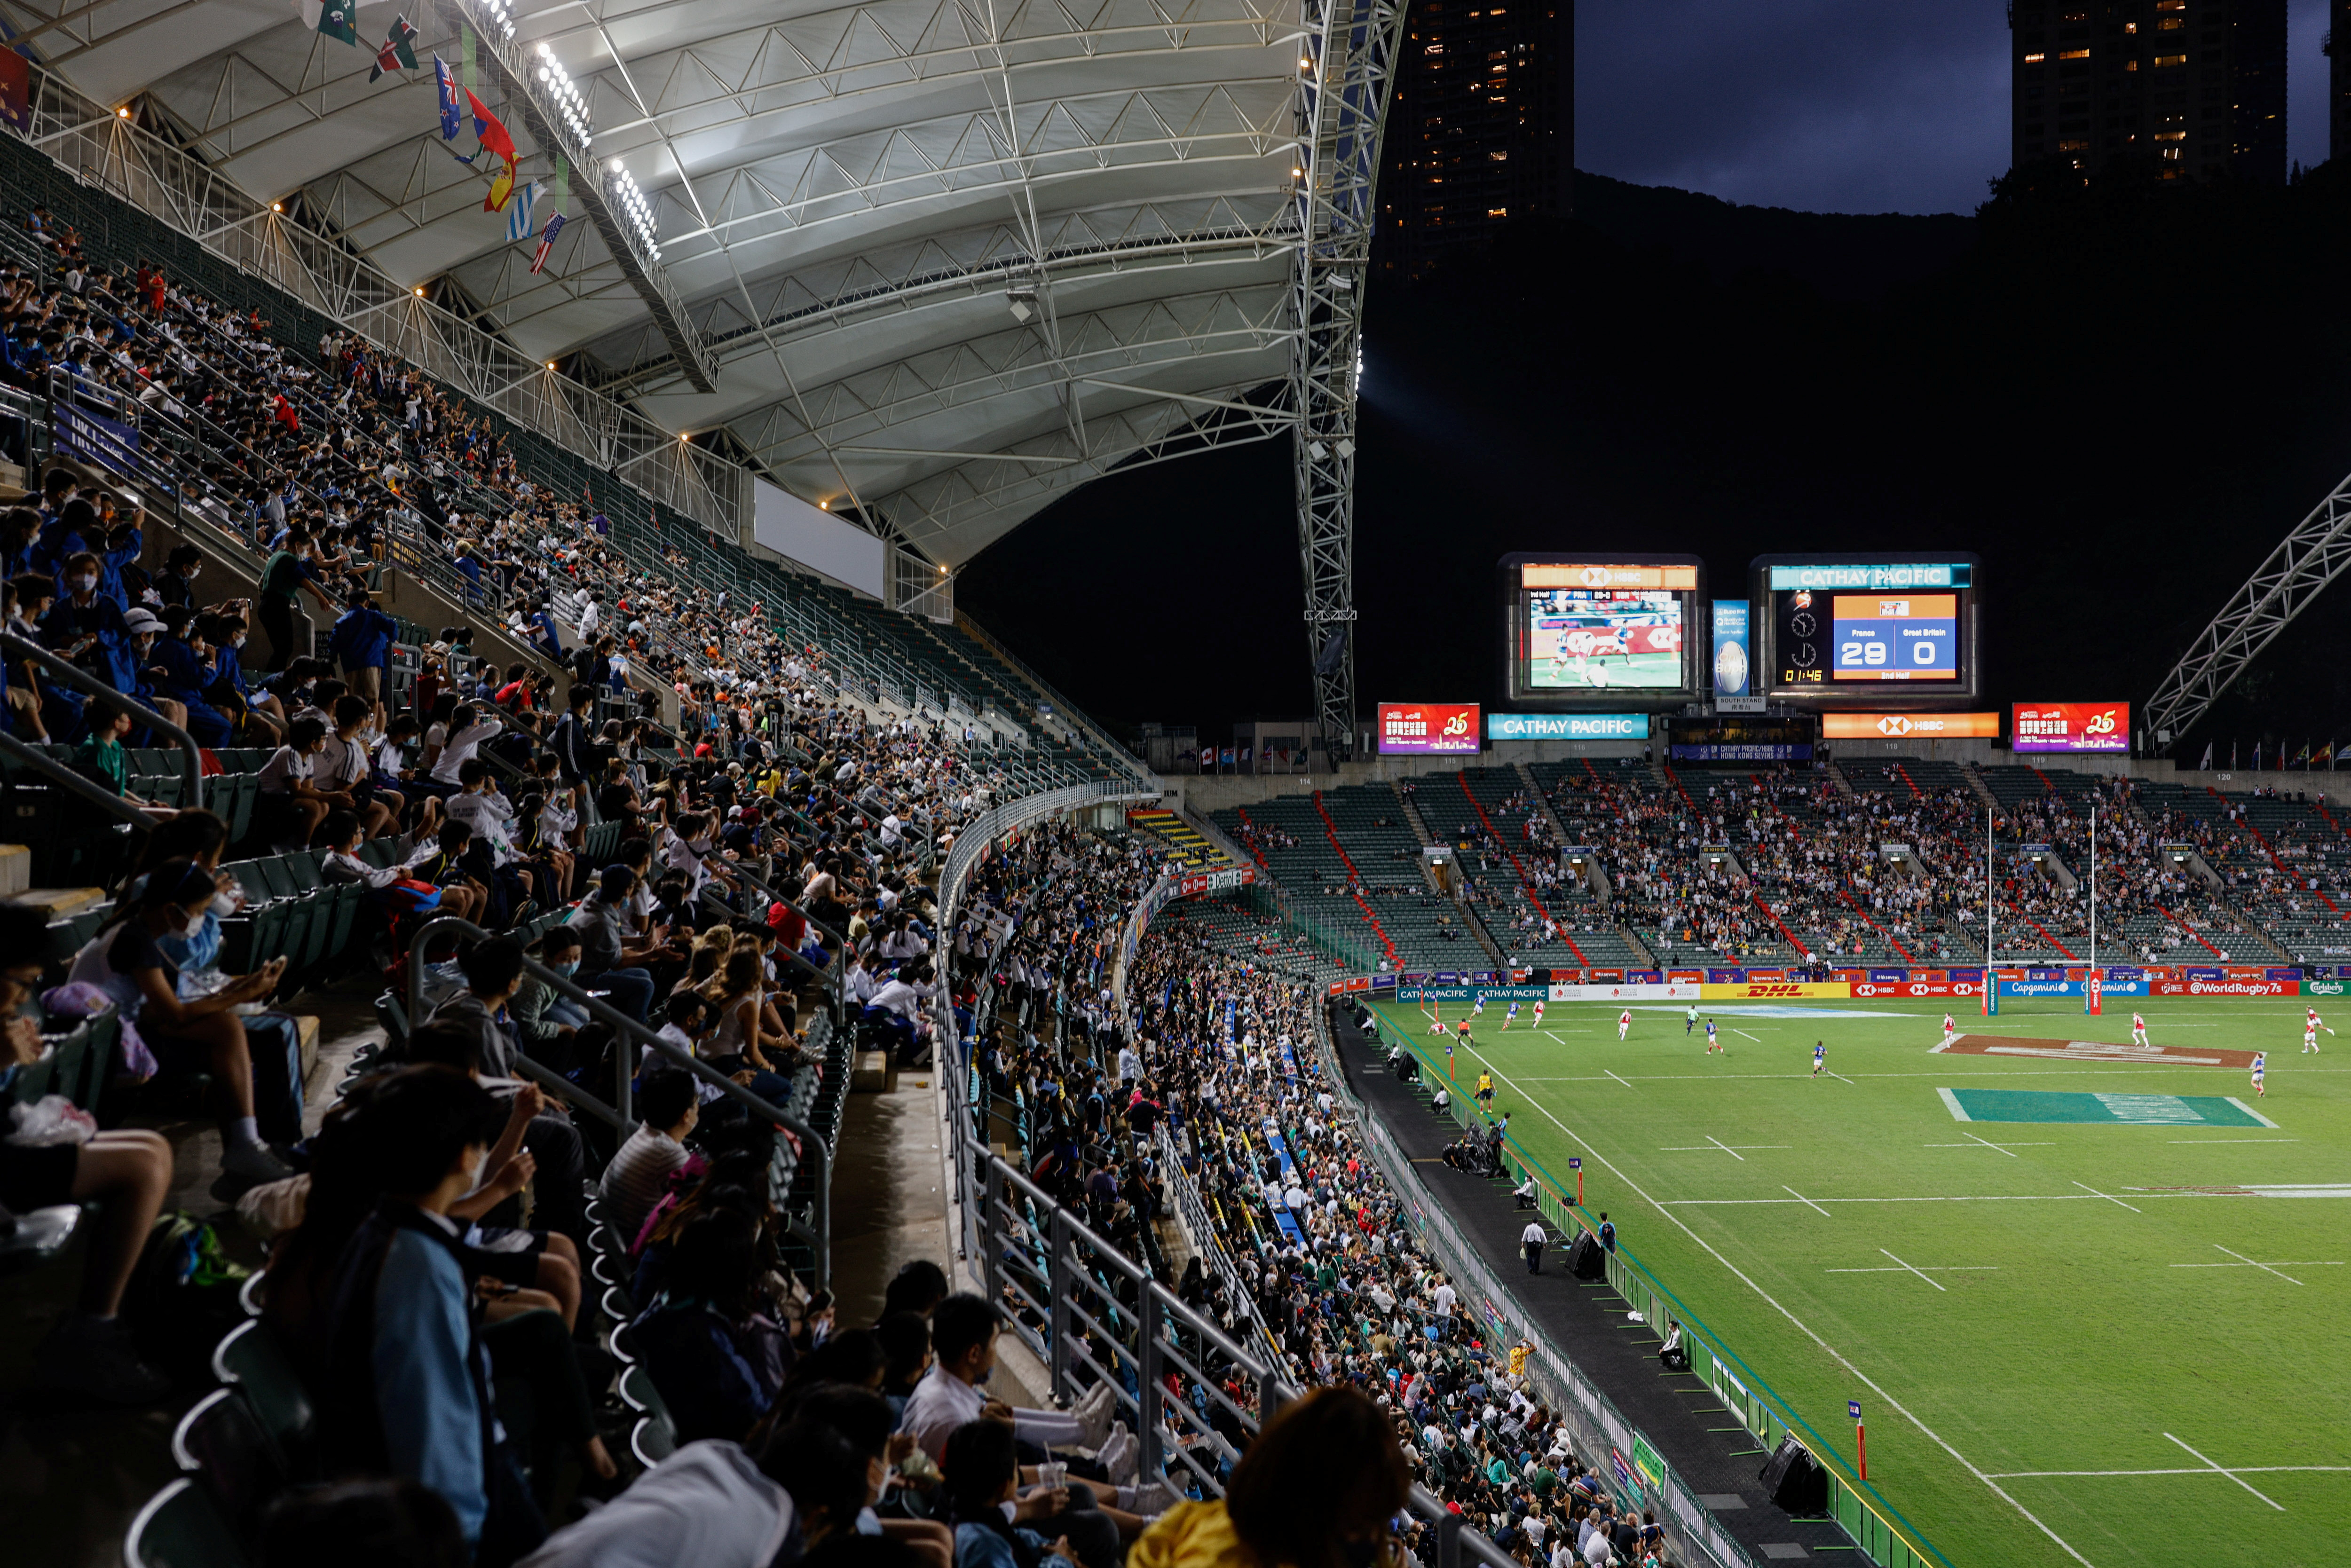 The general view of Hong Kong Stadium during the first day of the Hong Kong Sevens tournament in Hong Kong